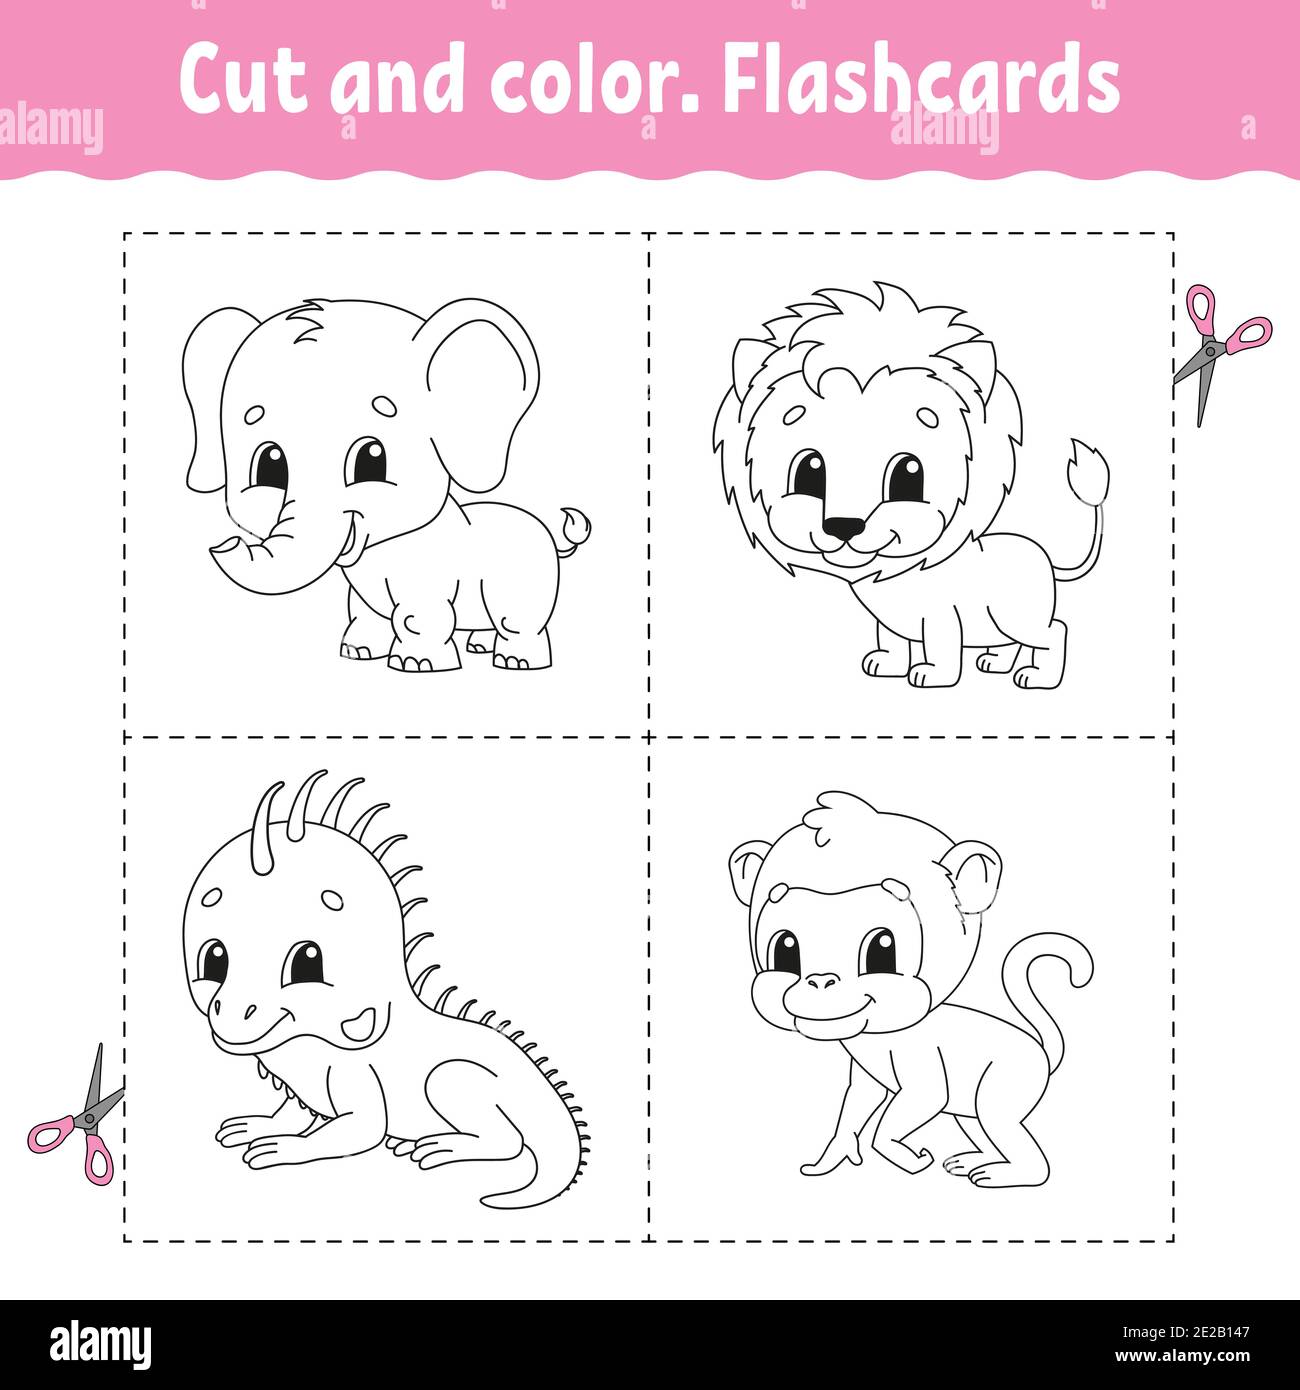 Cut and color. Flashcard Set. lion, monkey, iguana, elephant. Coloring book for kids. Cartoon character. Cute animal. Stock Vector